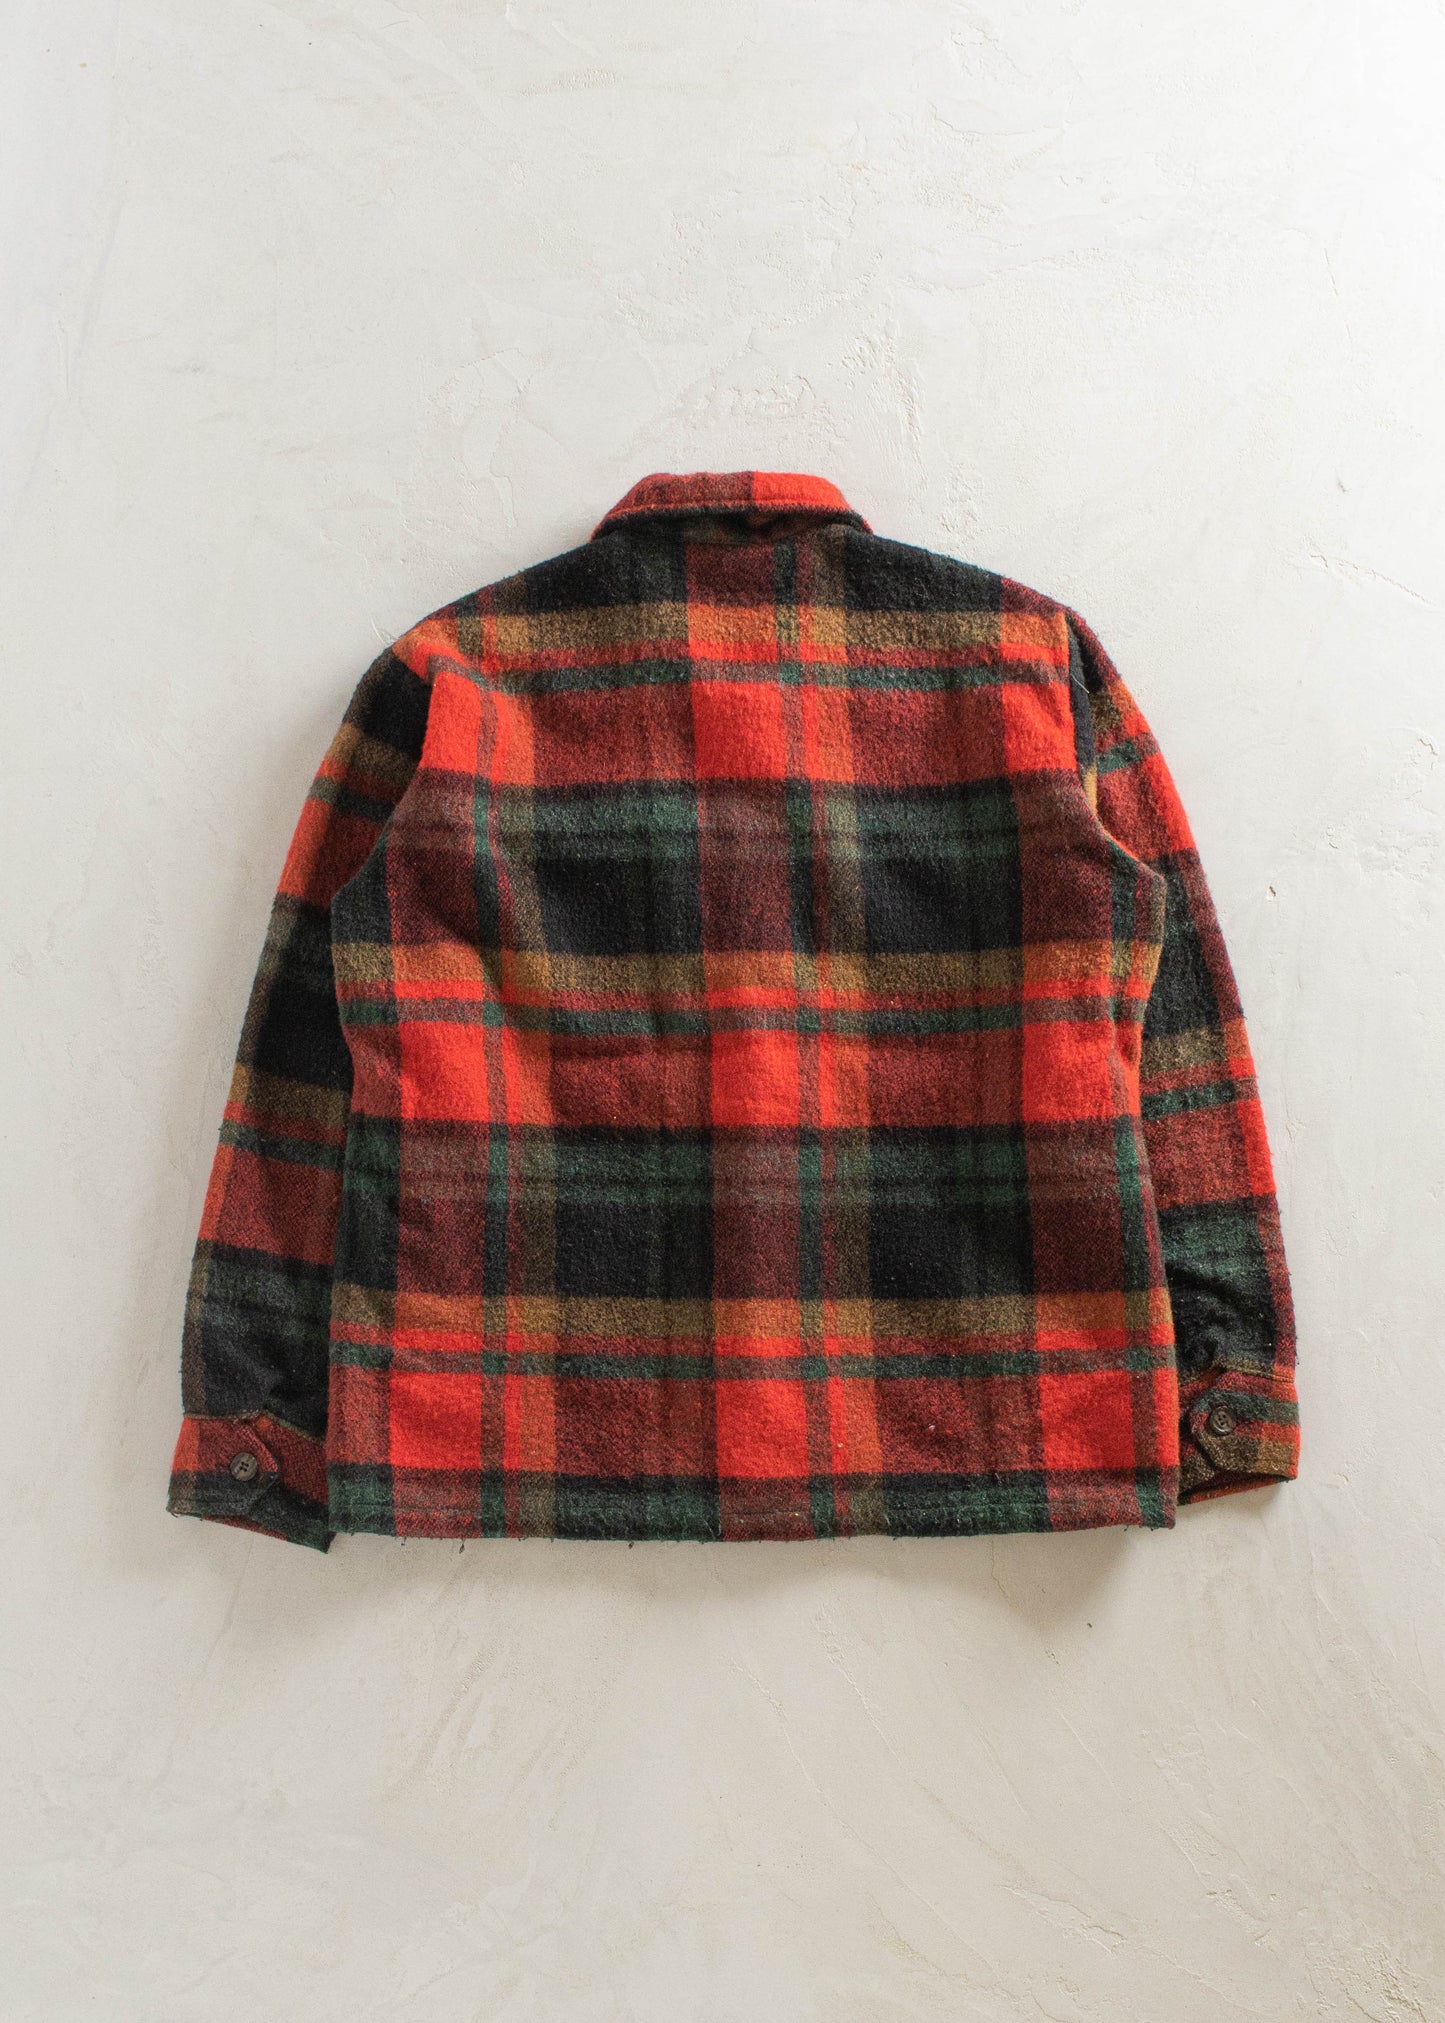 1960s Deacon Brothers Wool Flannel Jacket Size M/L